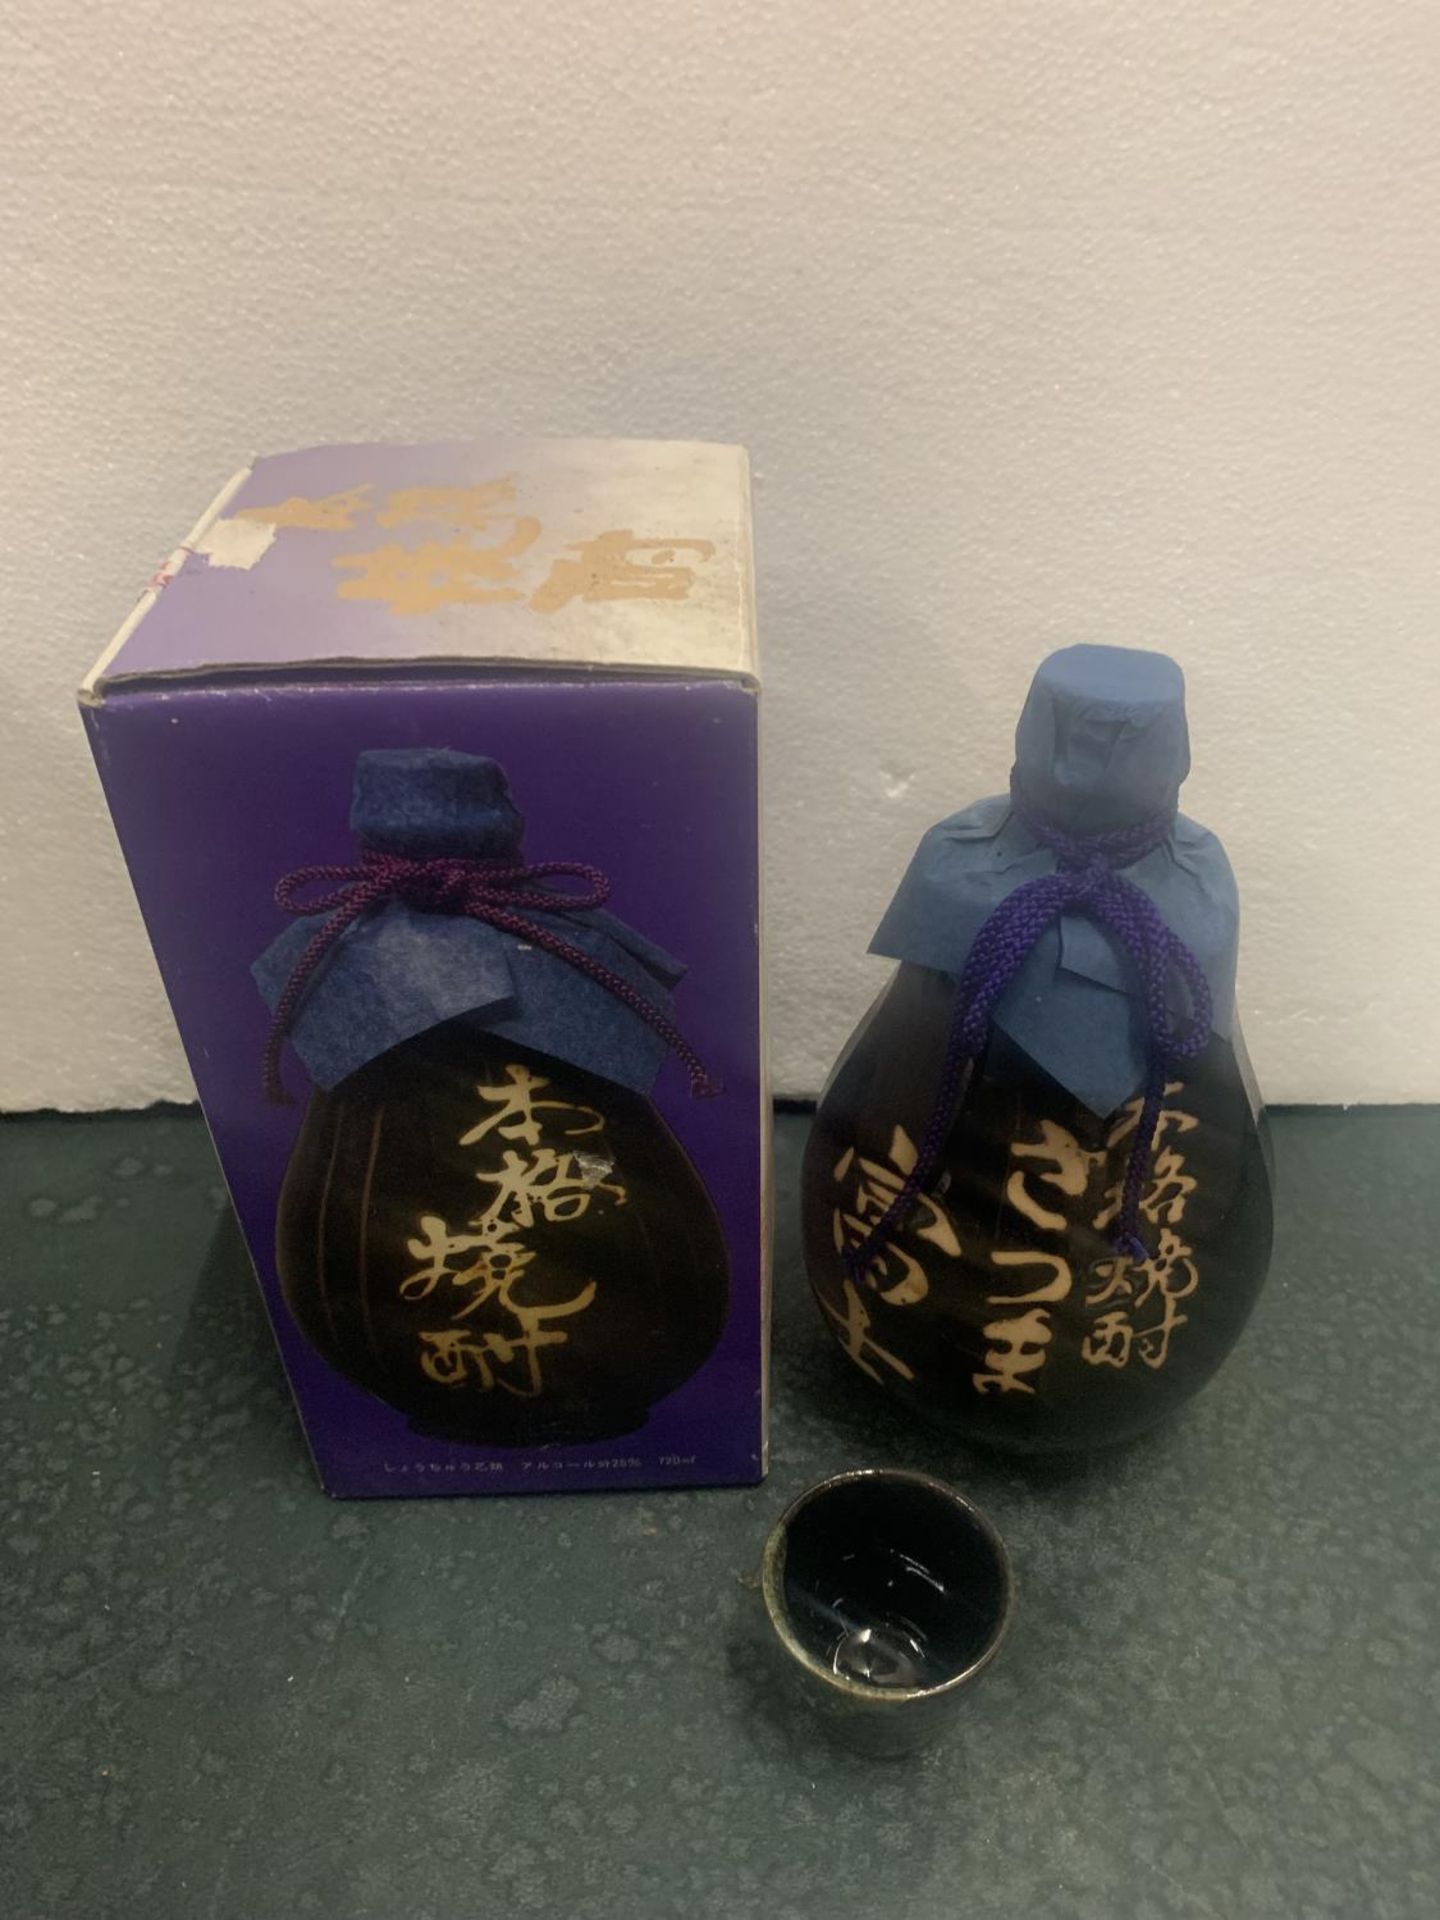 A BOXED BOTTLE OF ORIENTAL LIQUER - Image 2 of 2